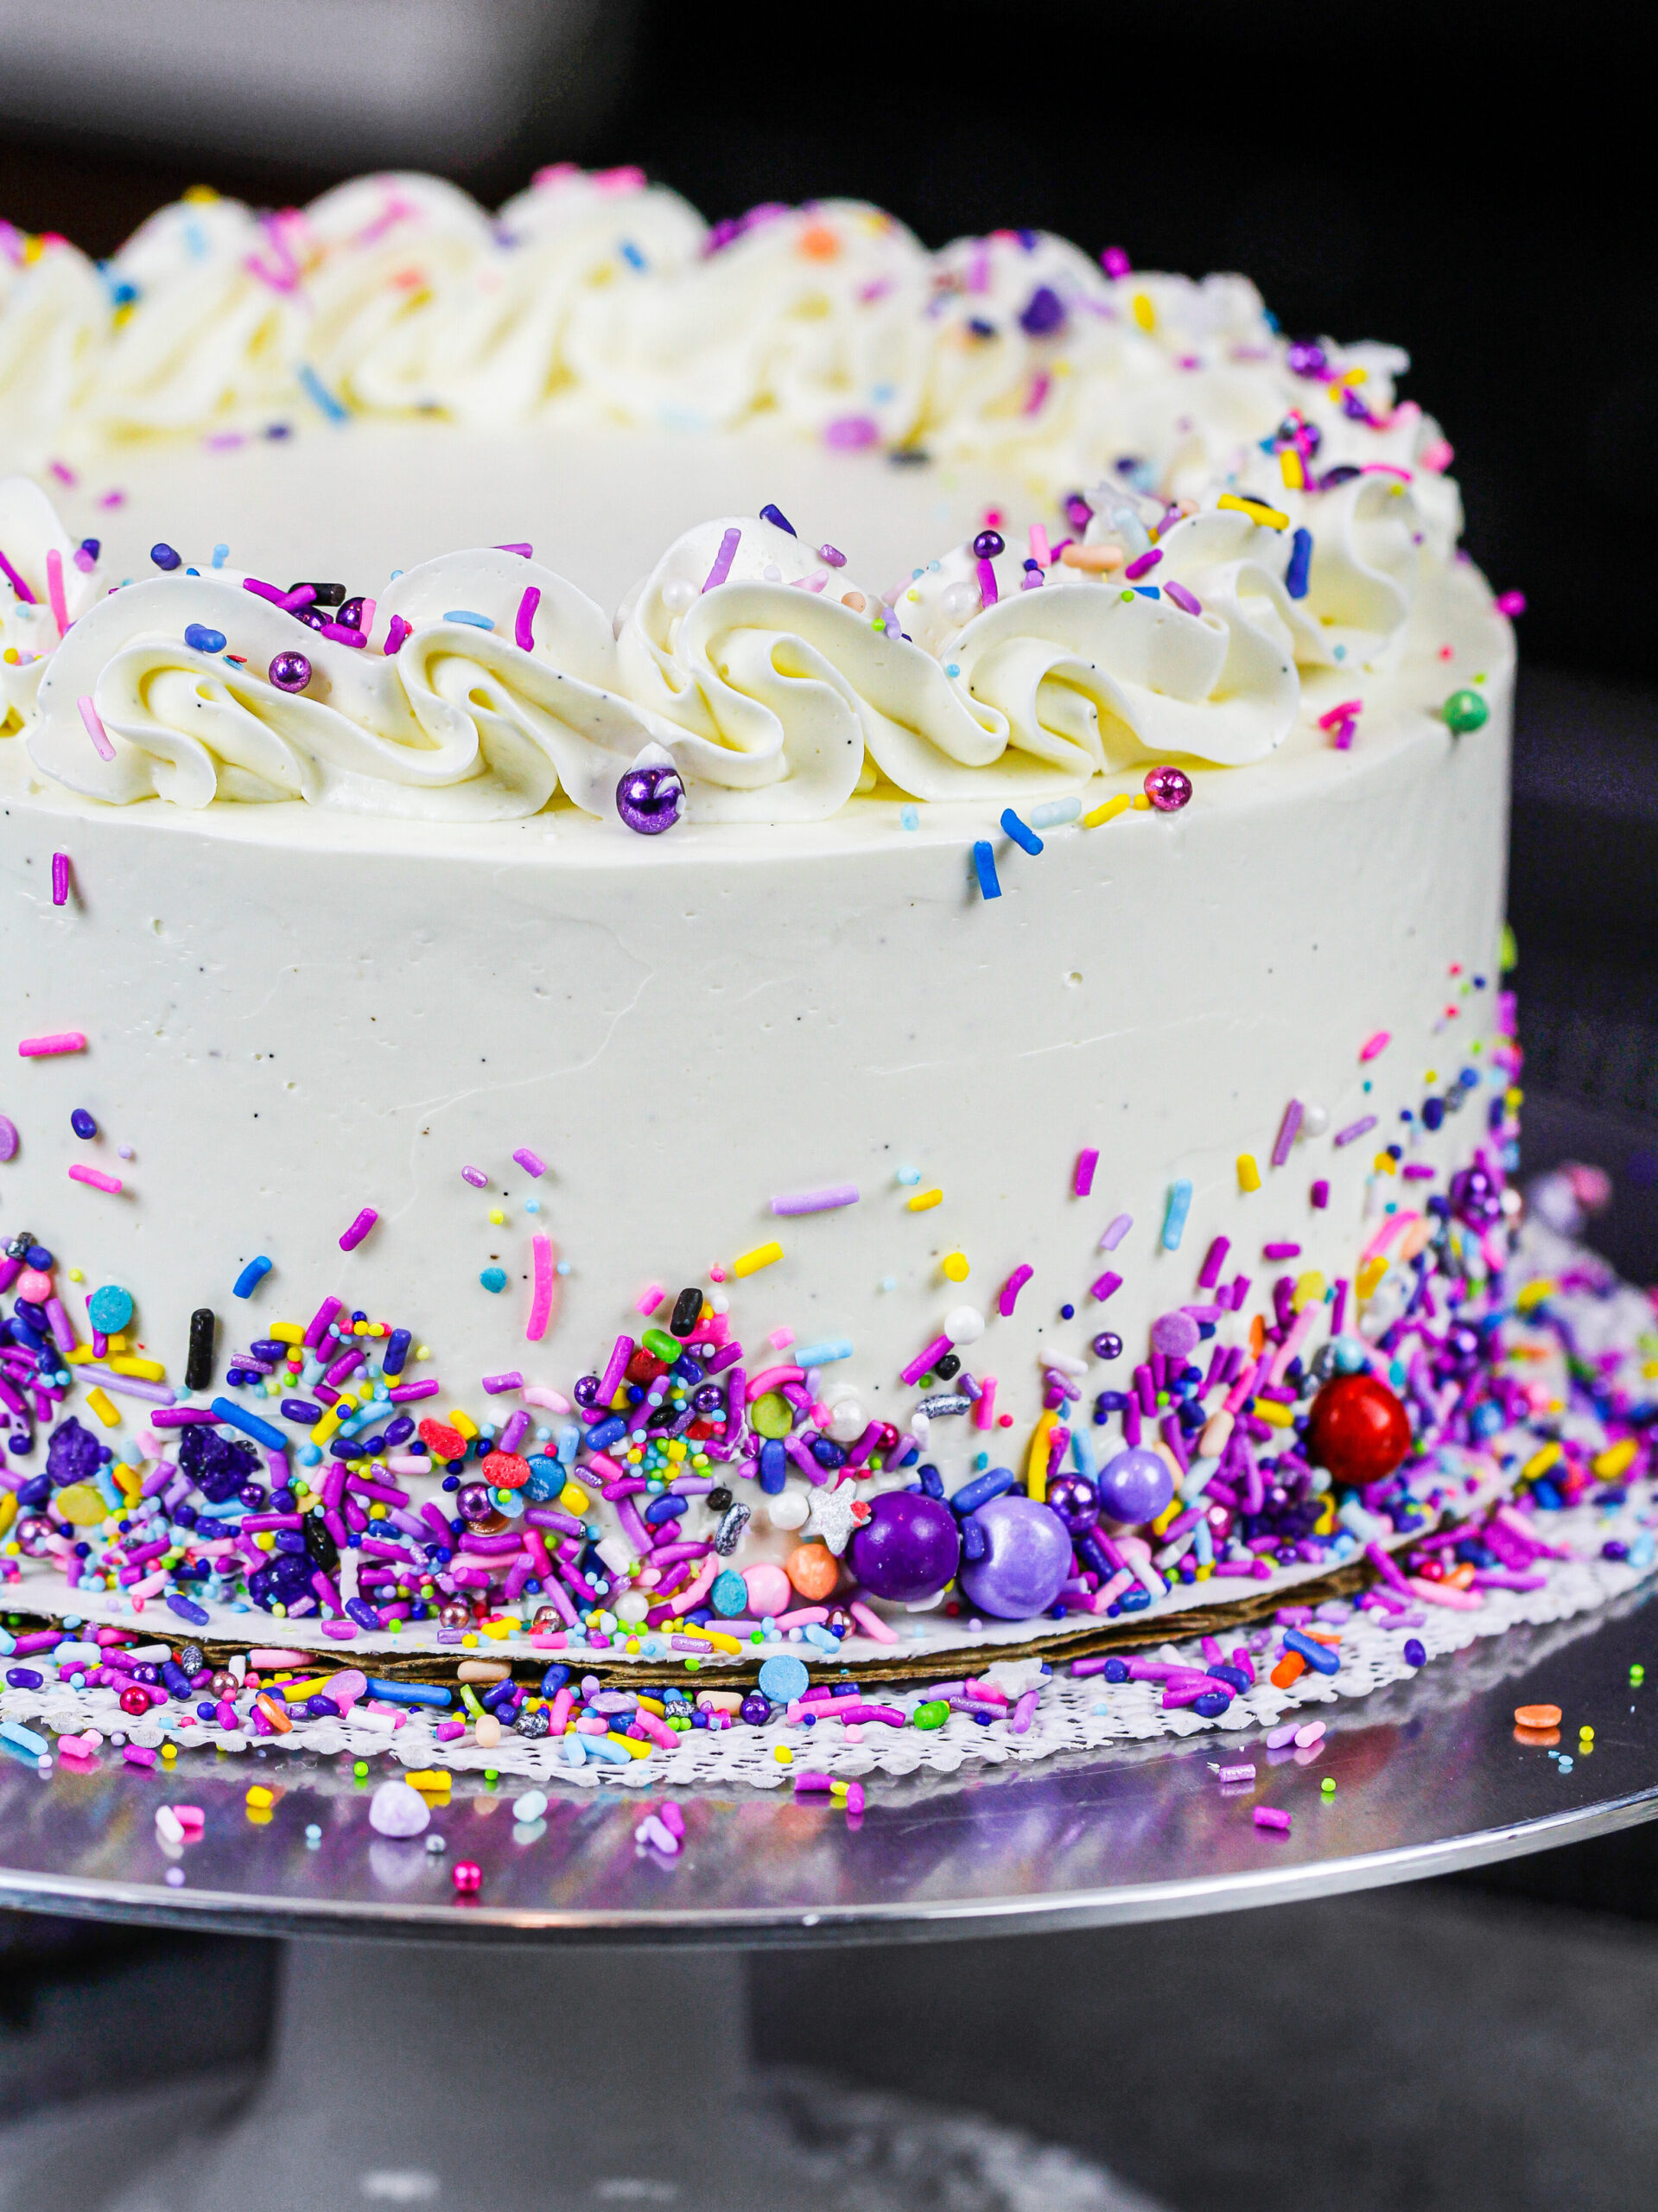 20 Of The Best Sugar-Free Cakes You Need To Try - Whimsy & Spice